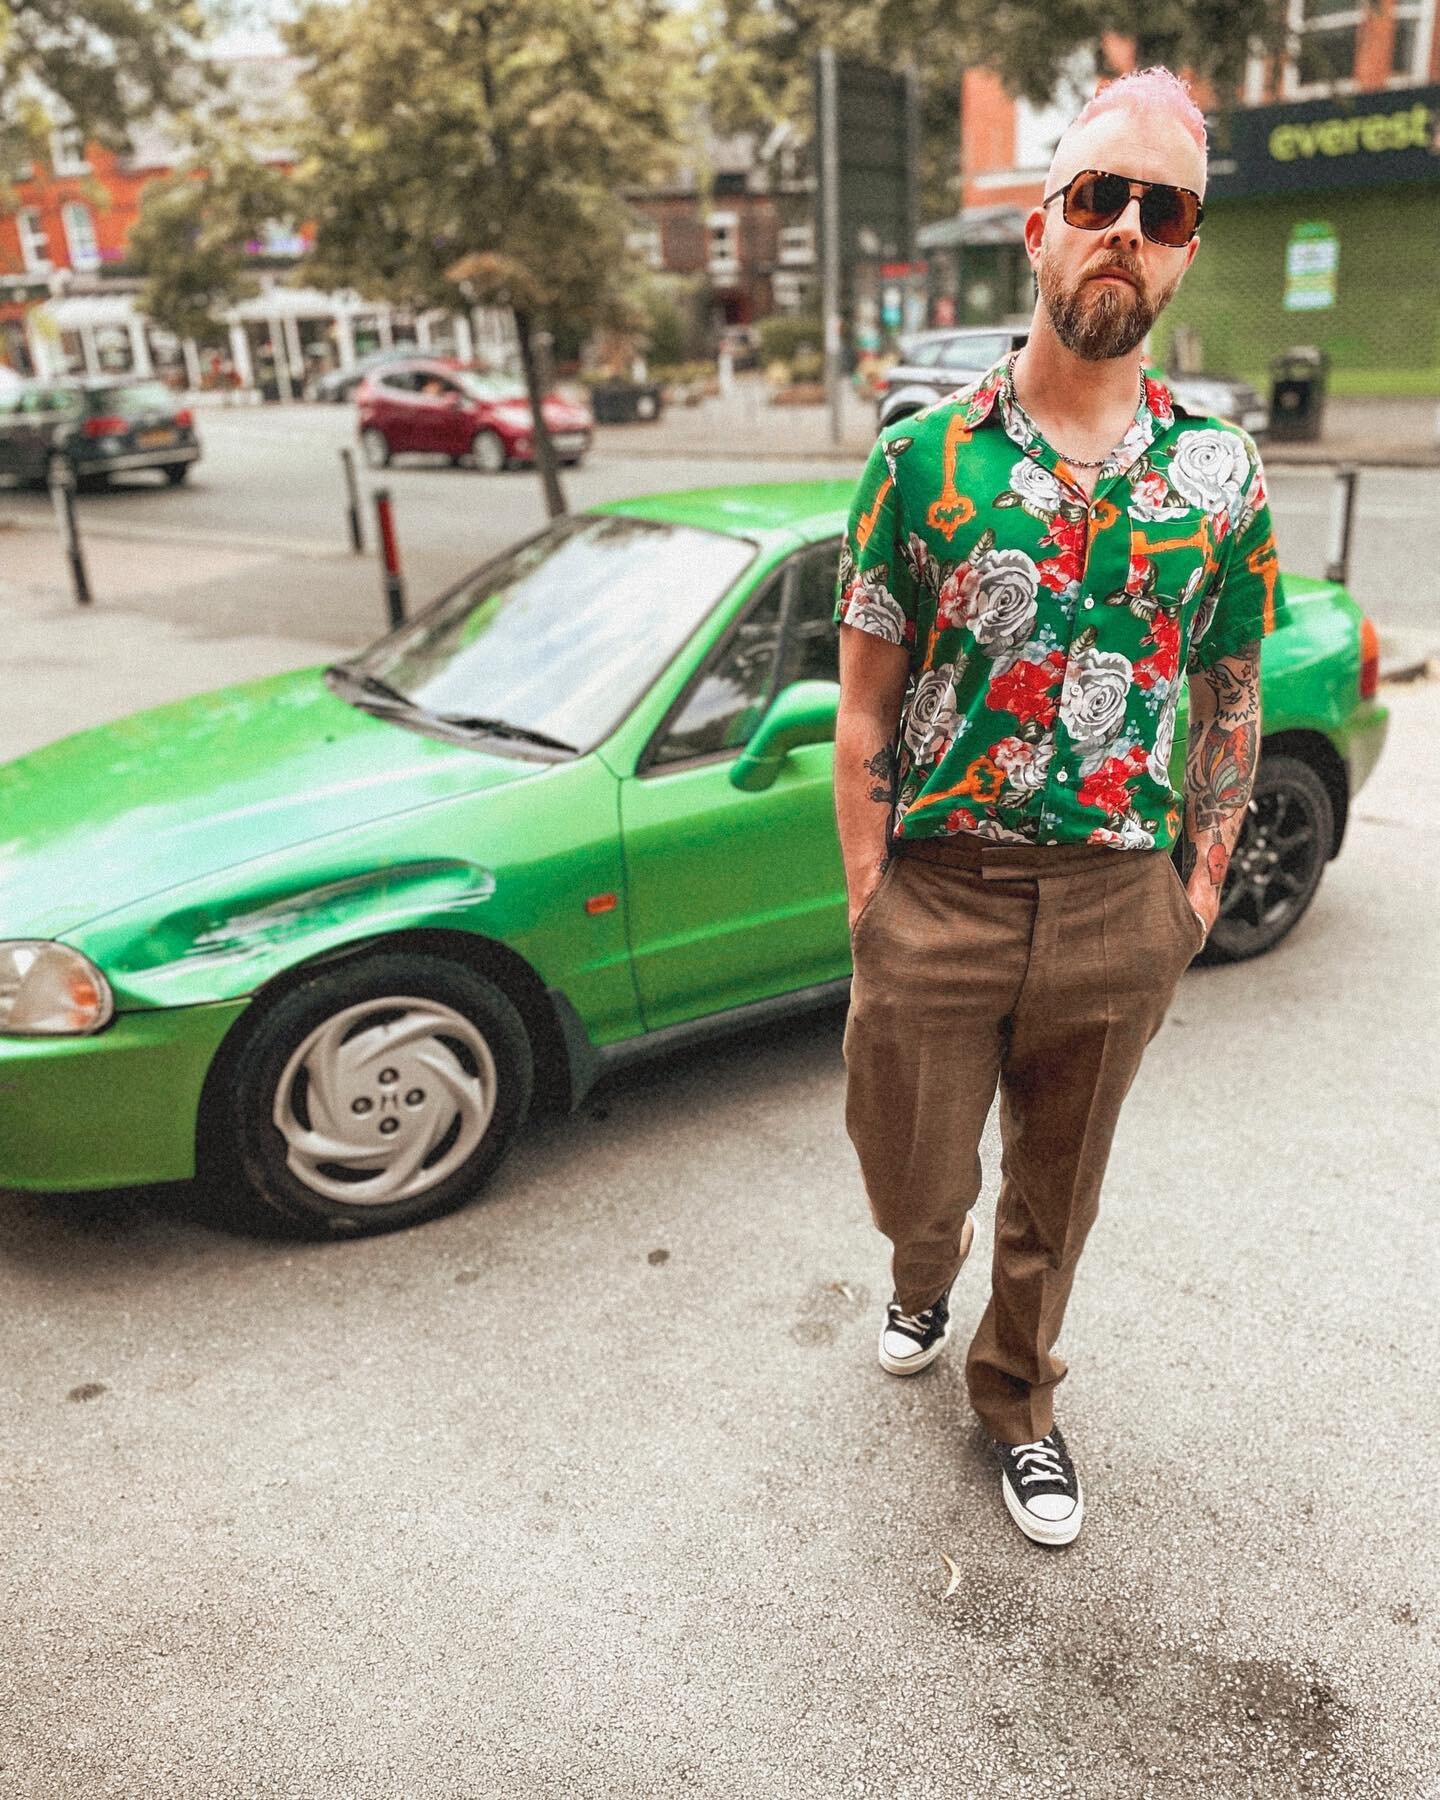 &ldquo;Adam stands in front of old cars - an occasional series&rdquo; is back. What make/model is this do we think? (Also - please keep listening to &ldquo;I&rsquo;ve Tried&rdquo; 💚)